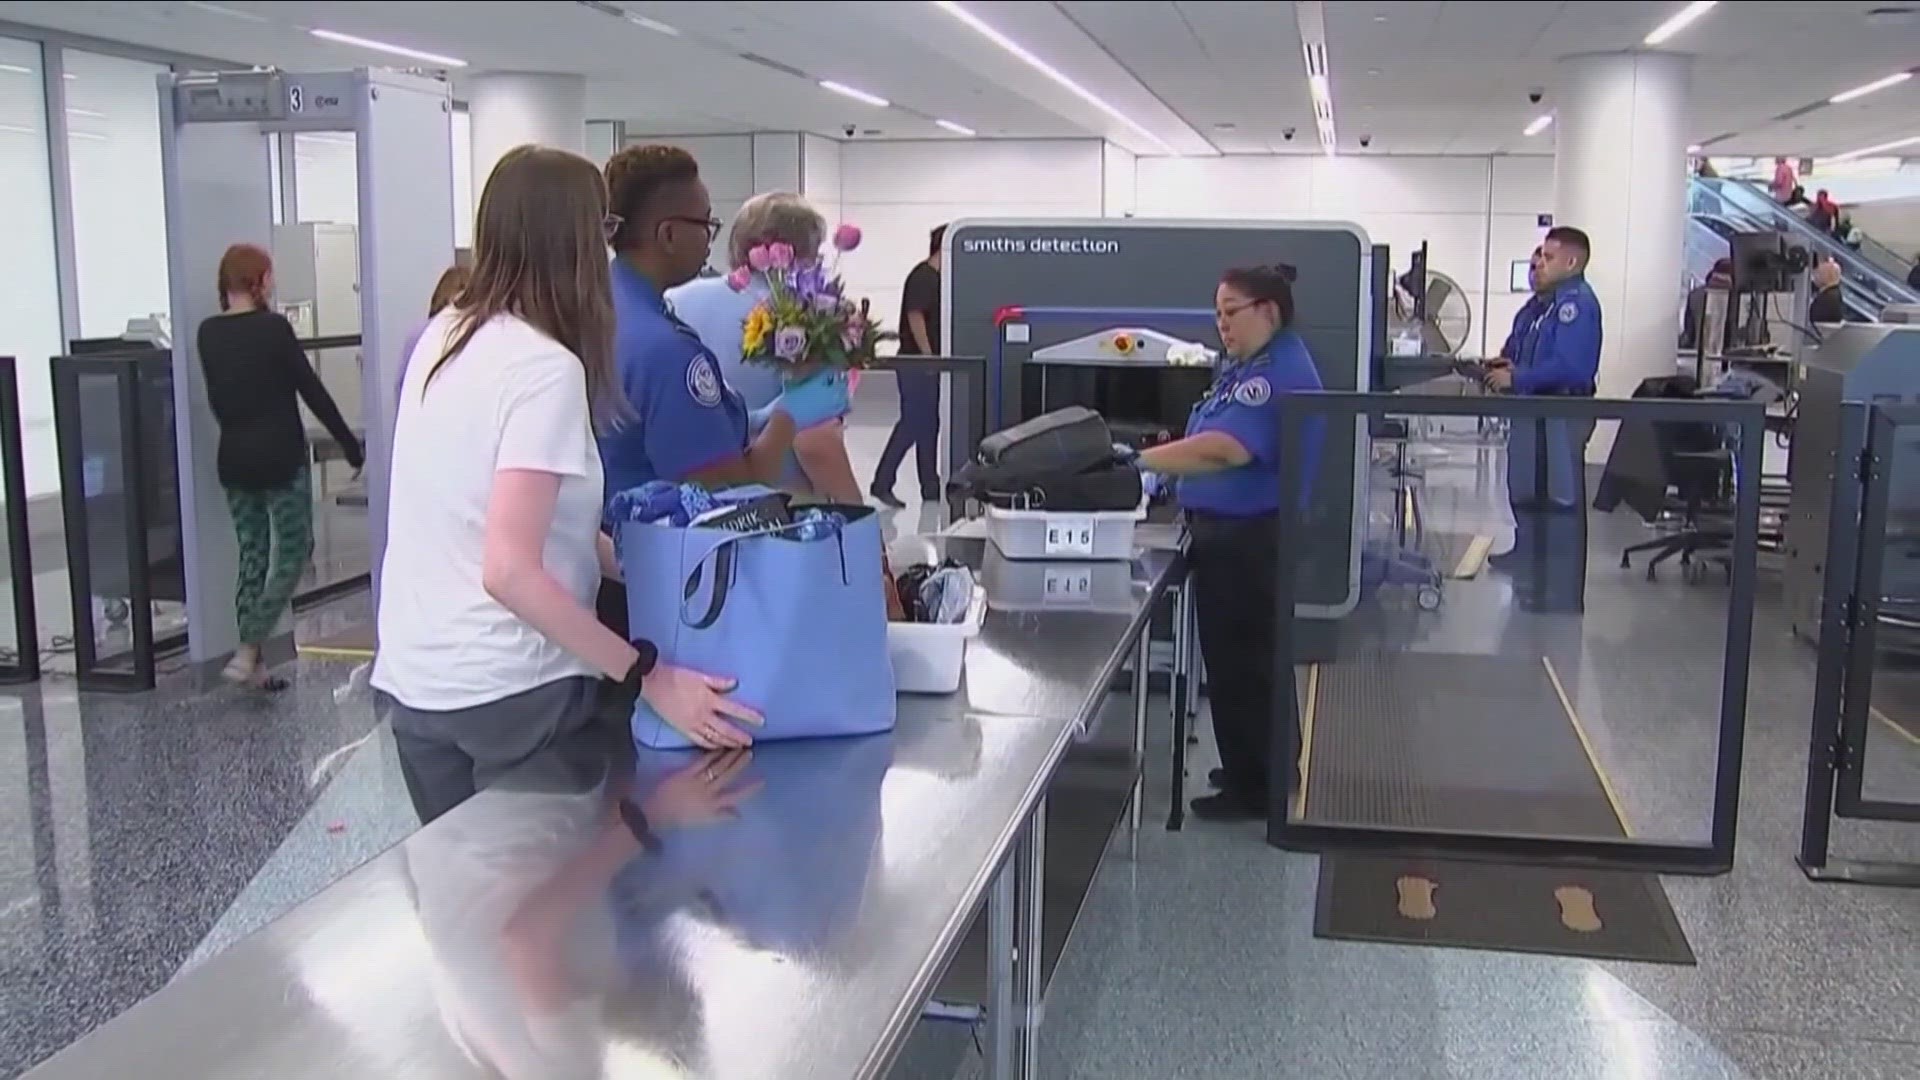 The TSA is urging people to remember that traveling with a firearm is allowed, but it must be packed properly as "checked baggage" and declared to the airline.